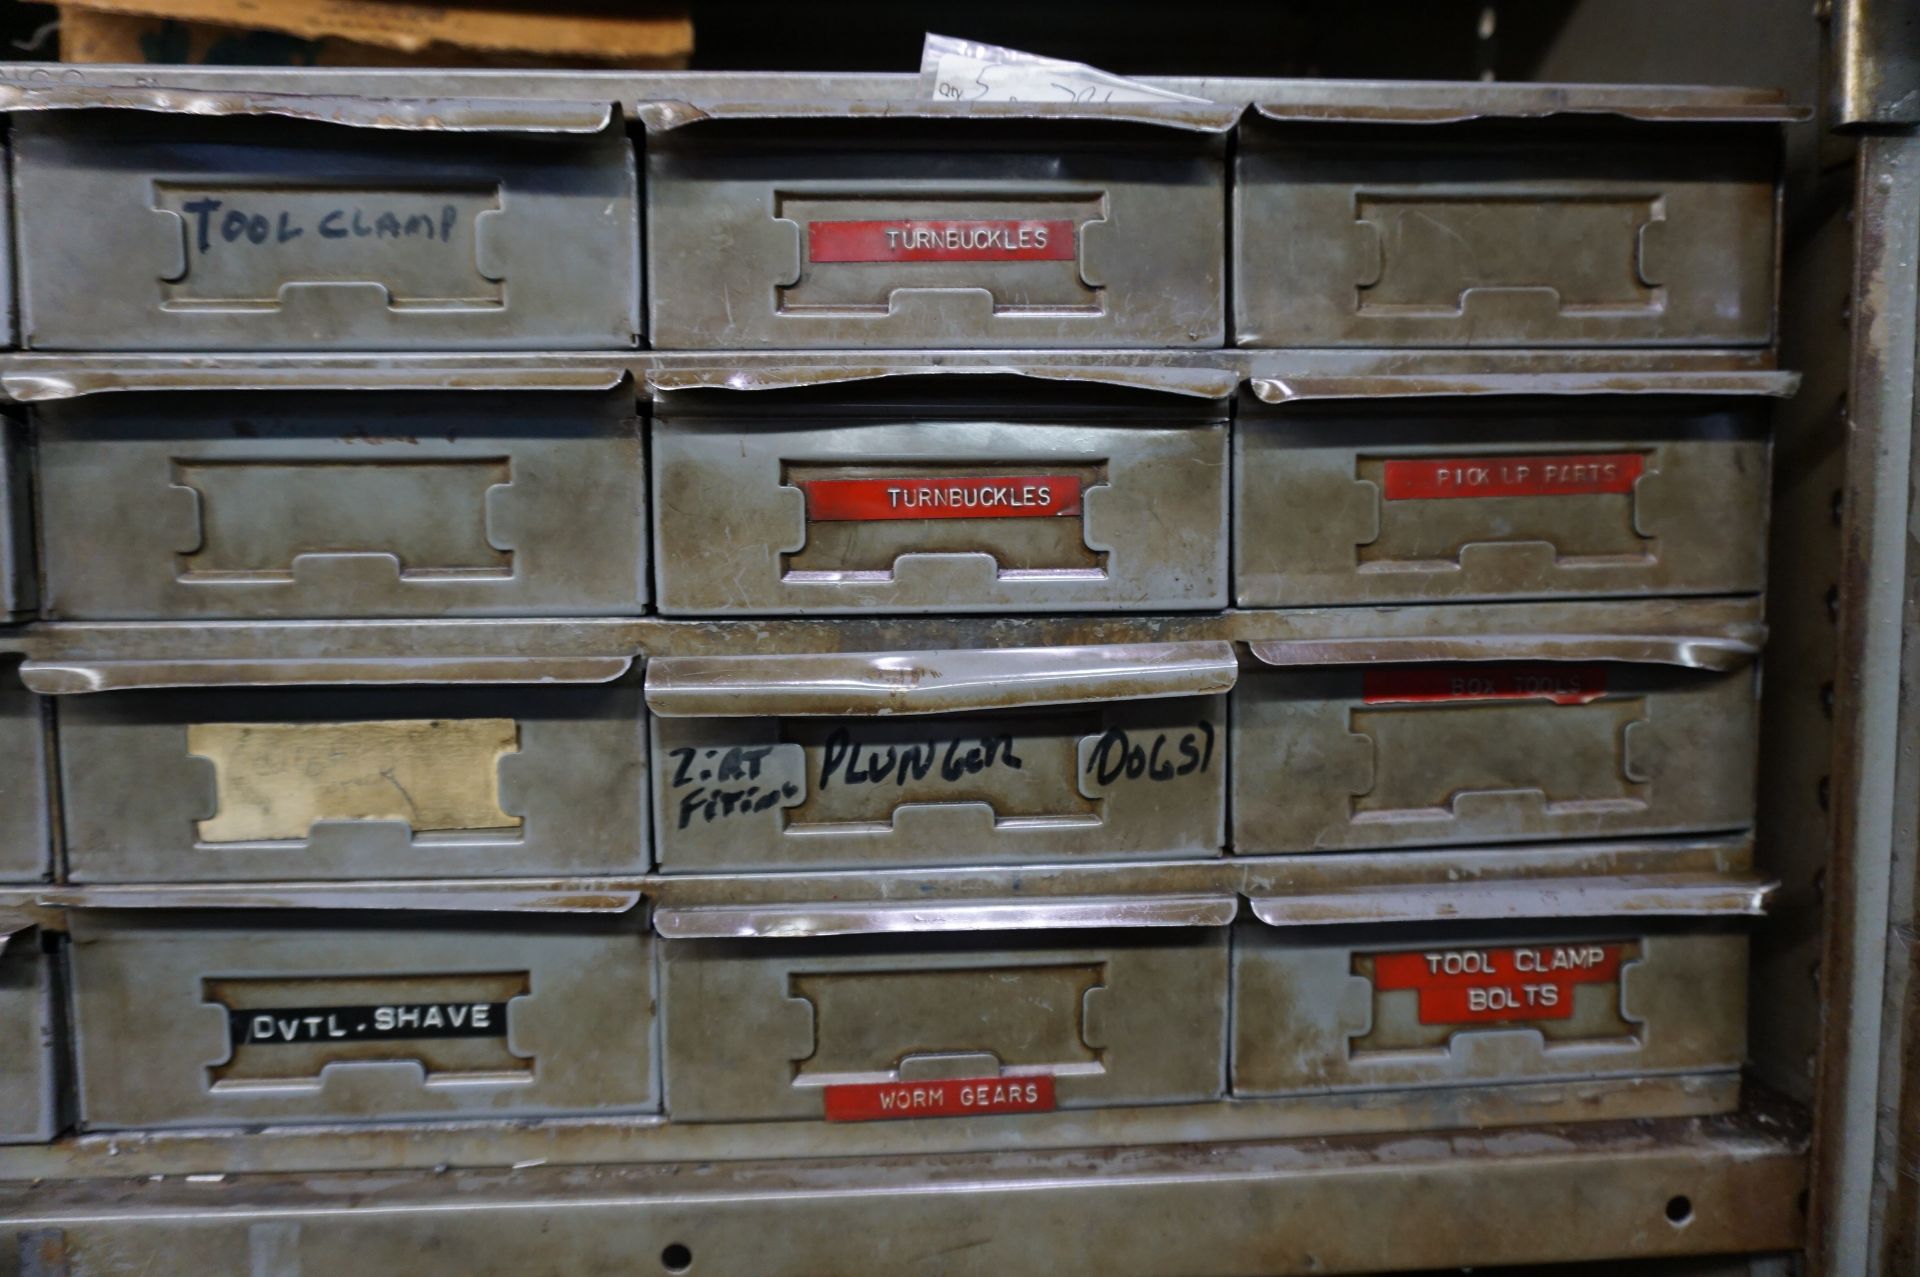 LOT TO INCLUDE: (2) STEEL SHOP CABINETS WITH MISC. HARDWARE - SHAVES, PINS, ROLLS, CLAMPS, BUS BARS, - Image 10 of 24